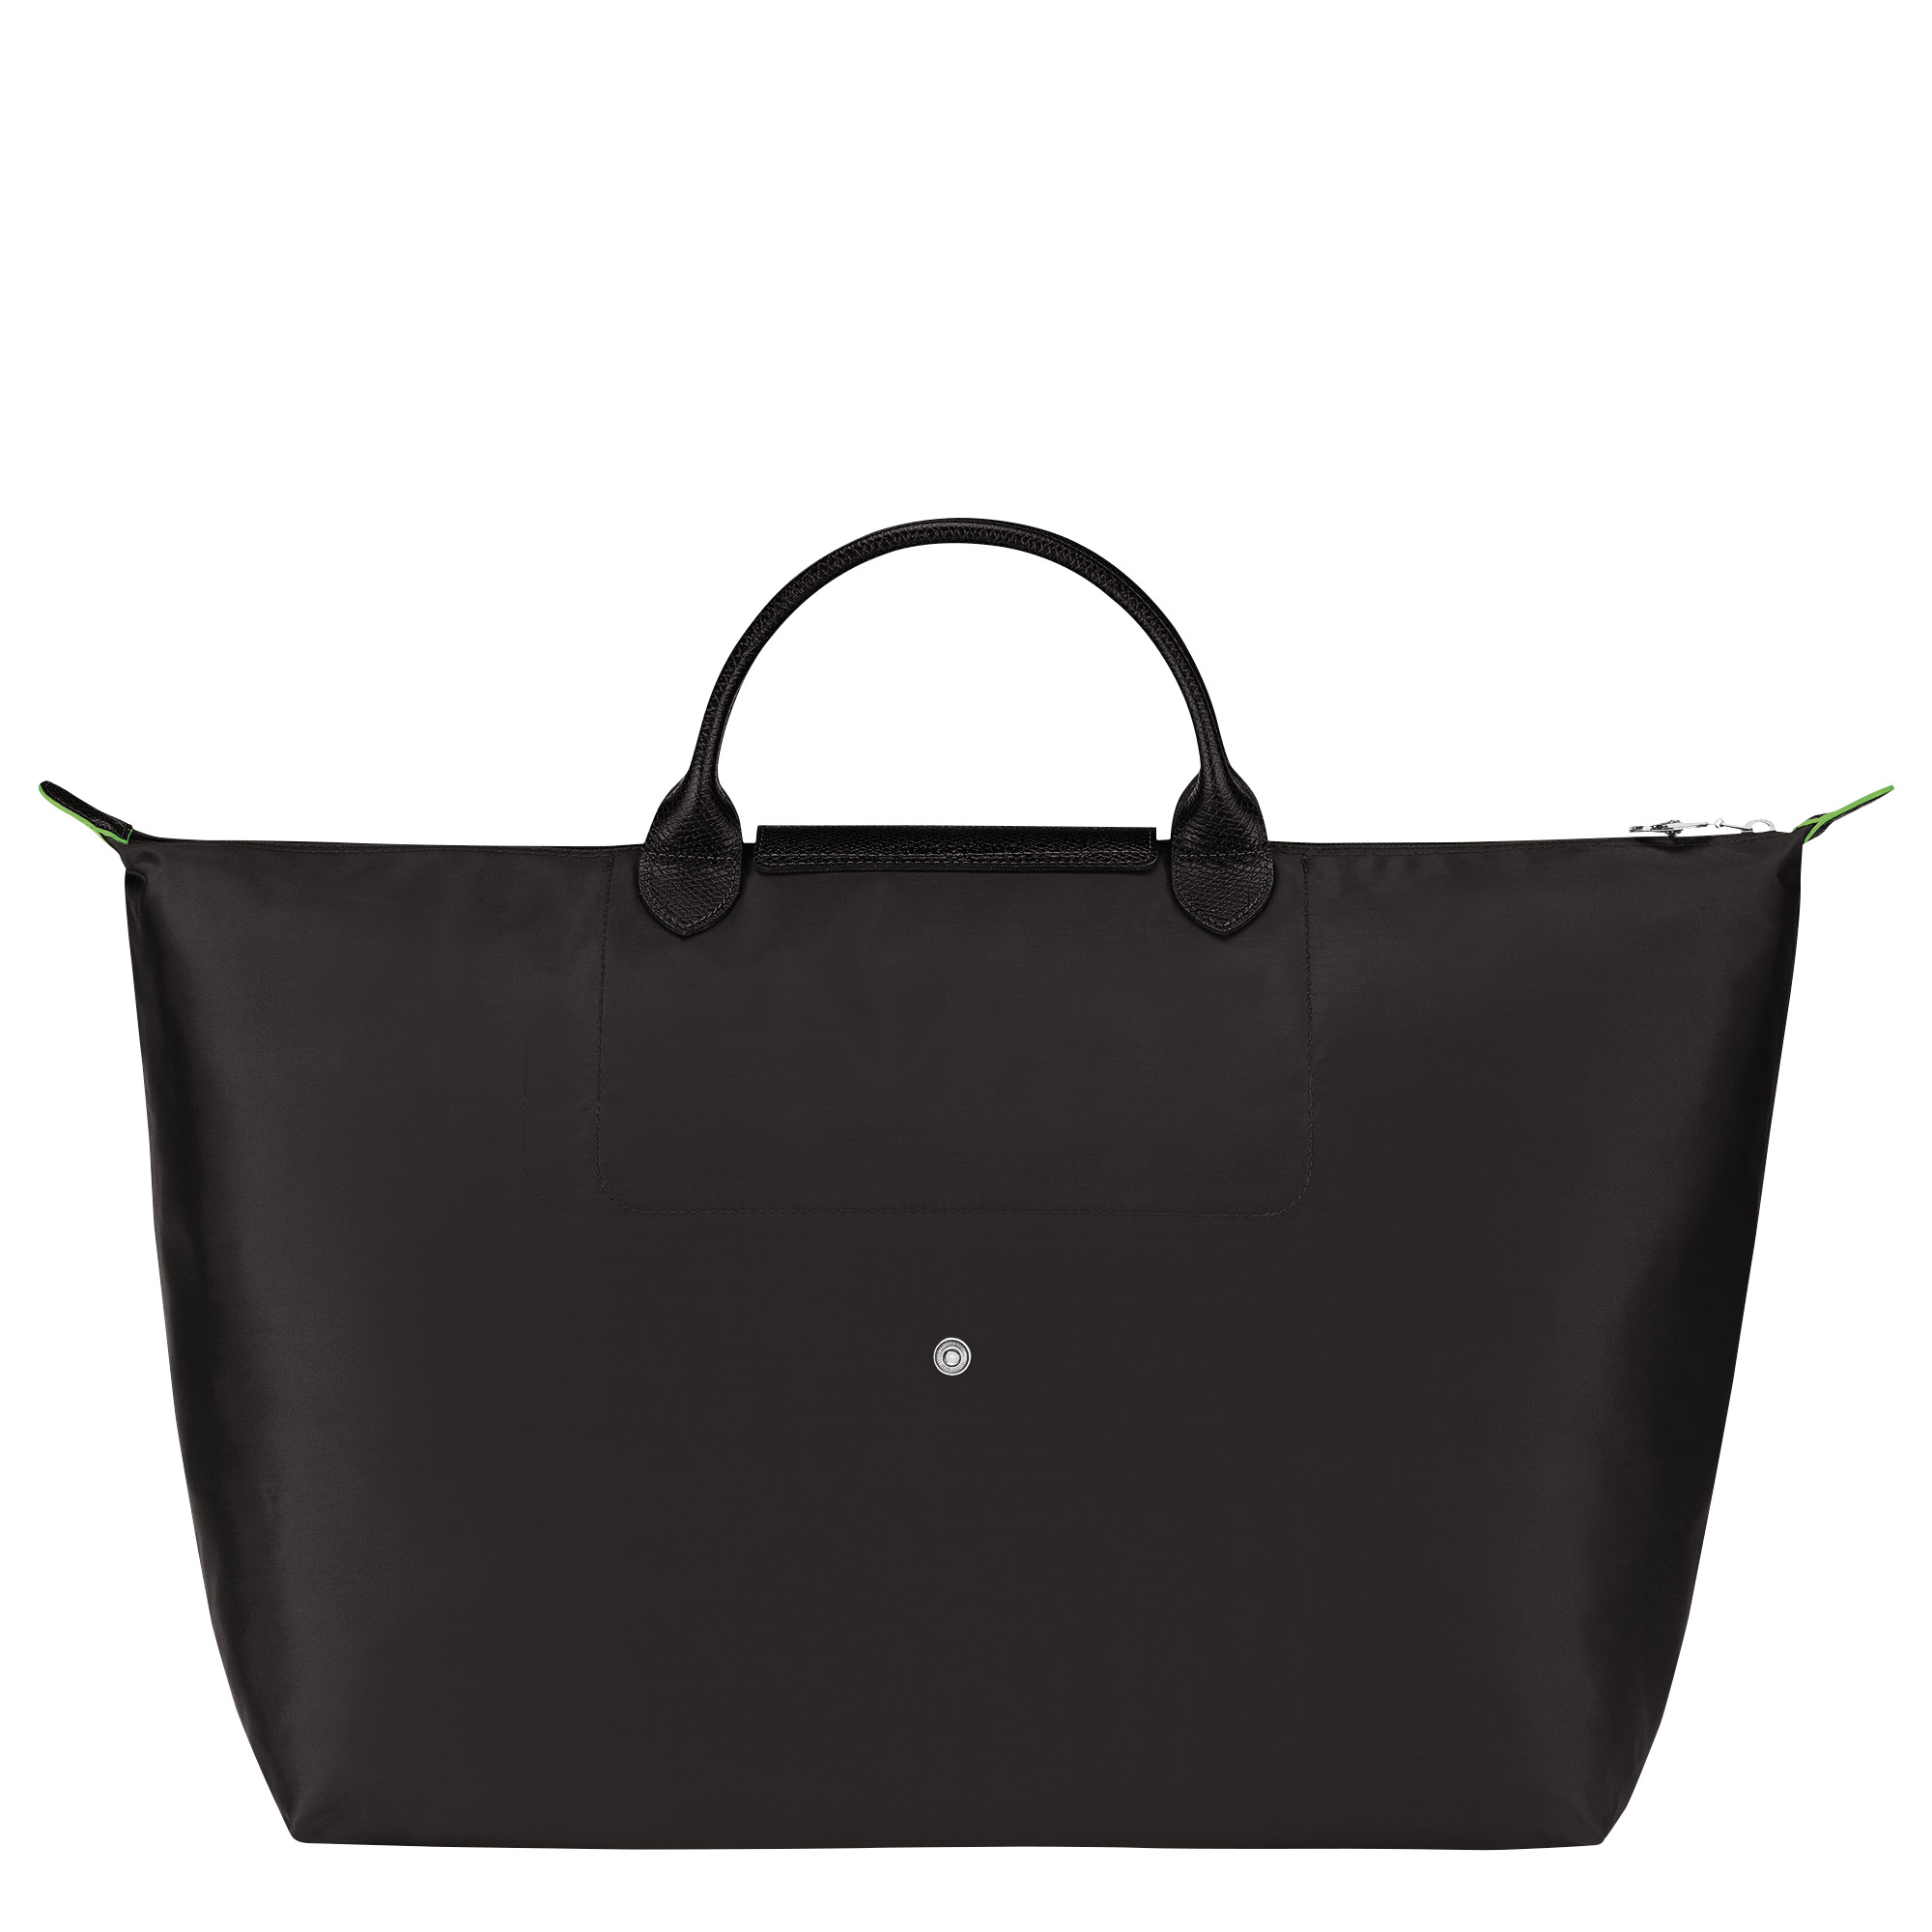 Le Pliage Green S Travel bag Black - Recycled canvas - 4